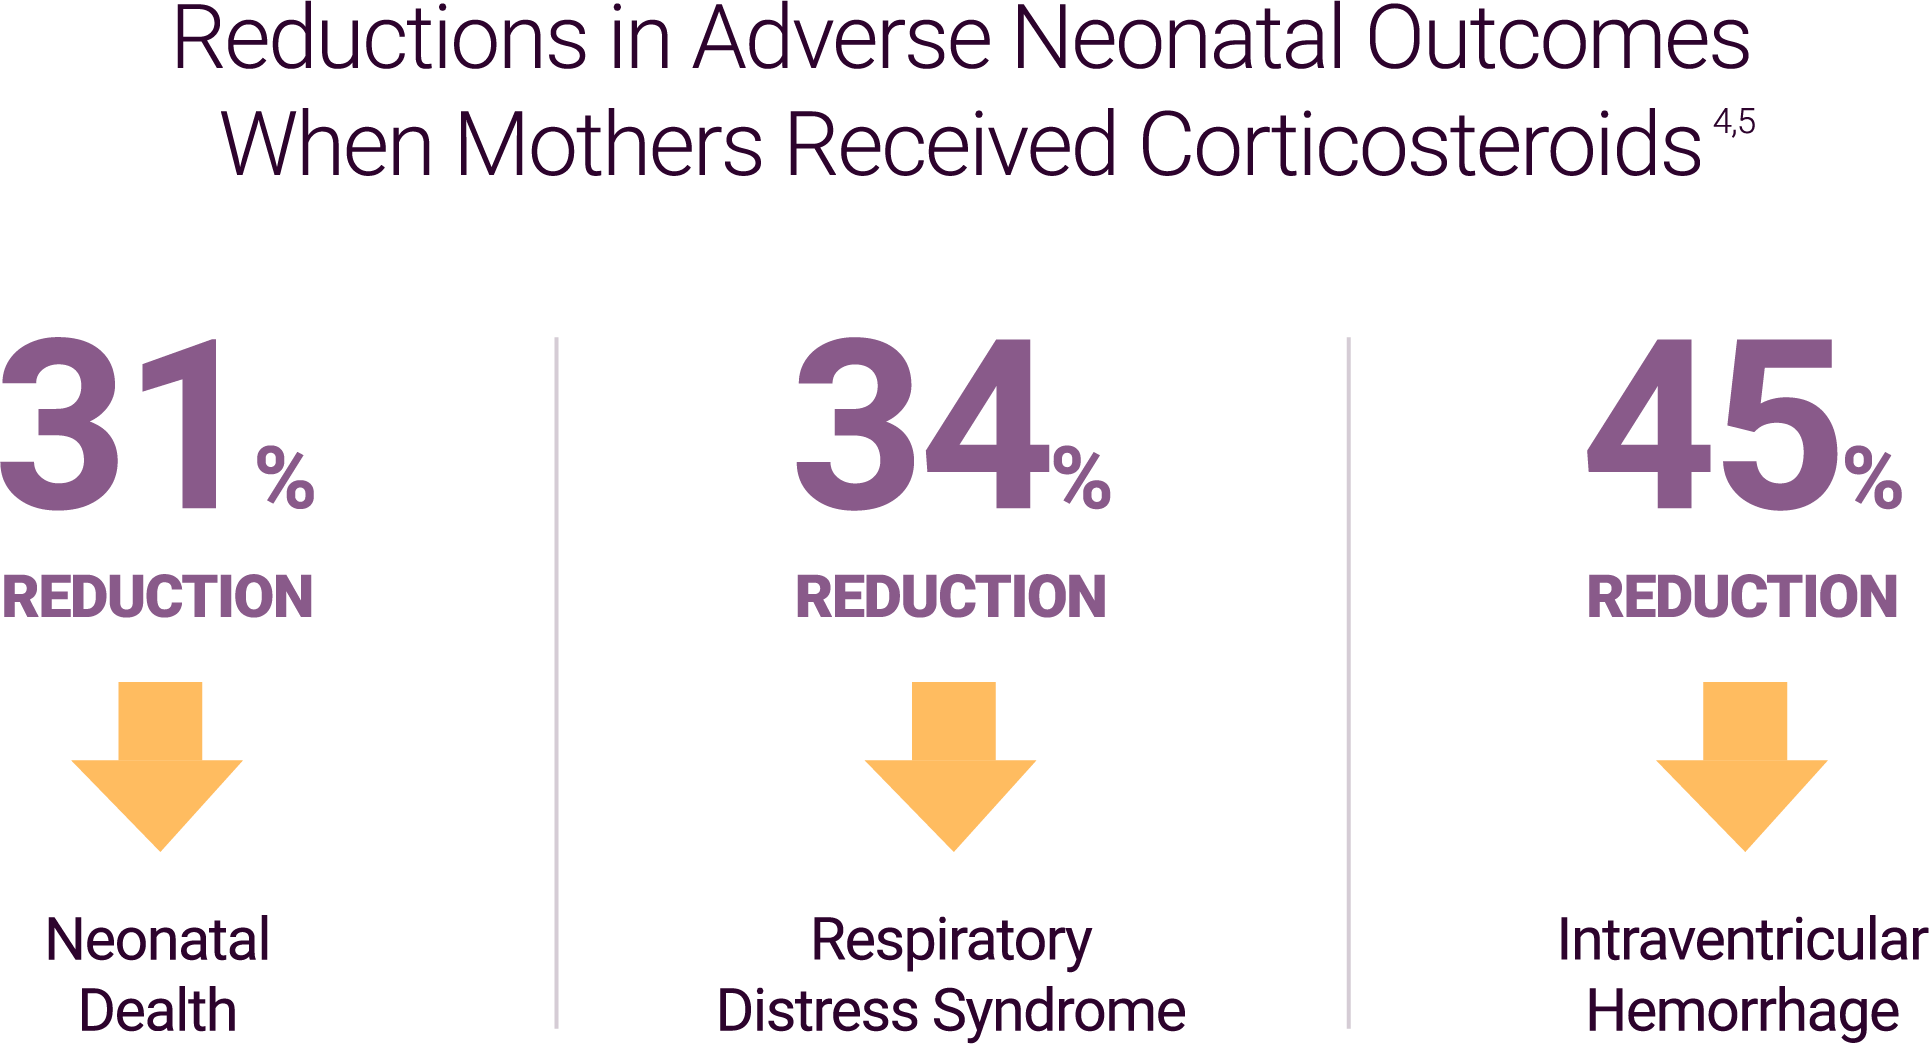 Reductions in adverse neonatal outcomes when mothers received corticosteroids